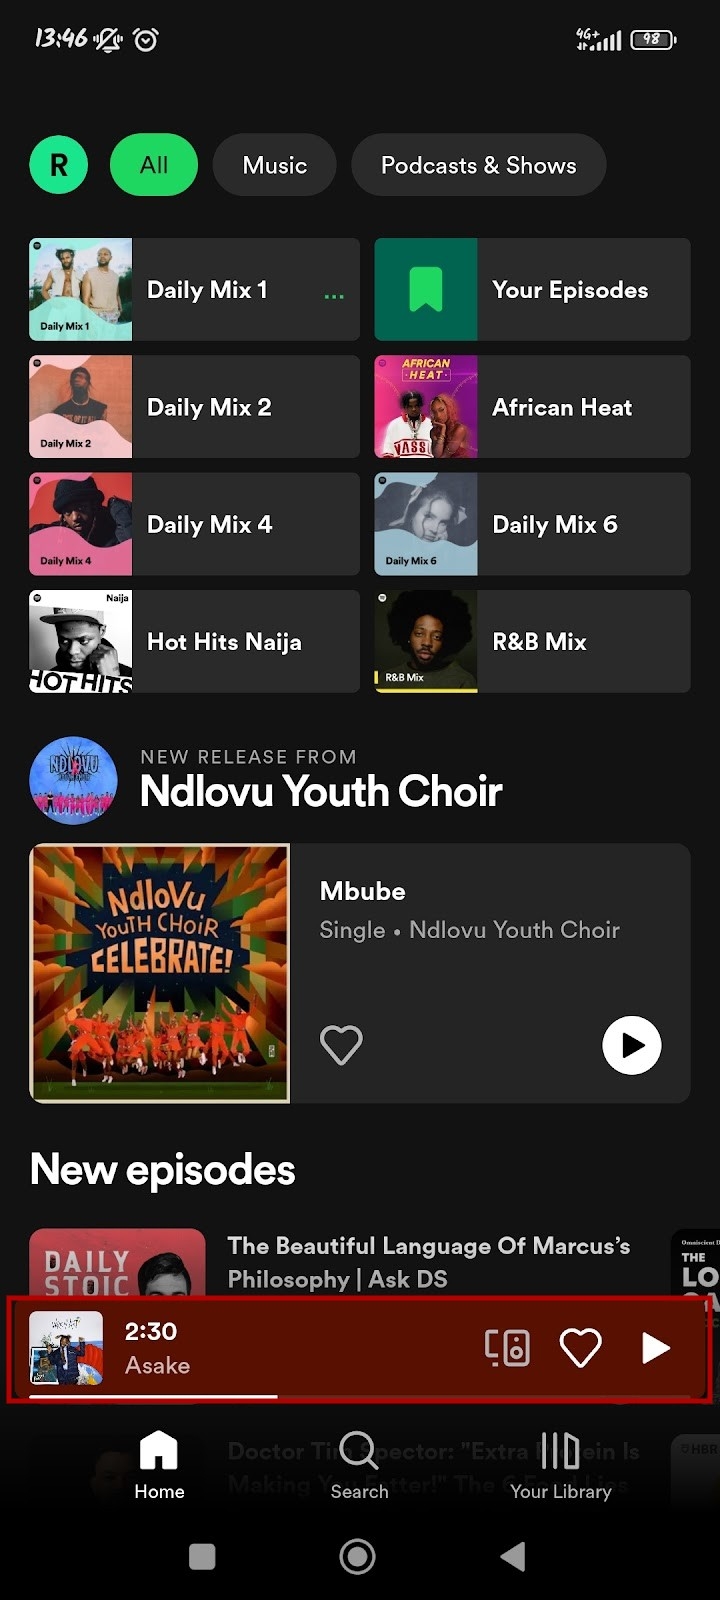 How to View Queue on Spotify on Desktop or Mobile